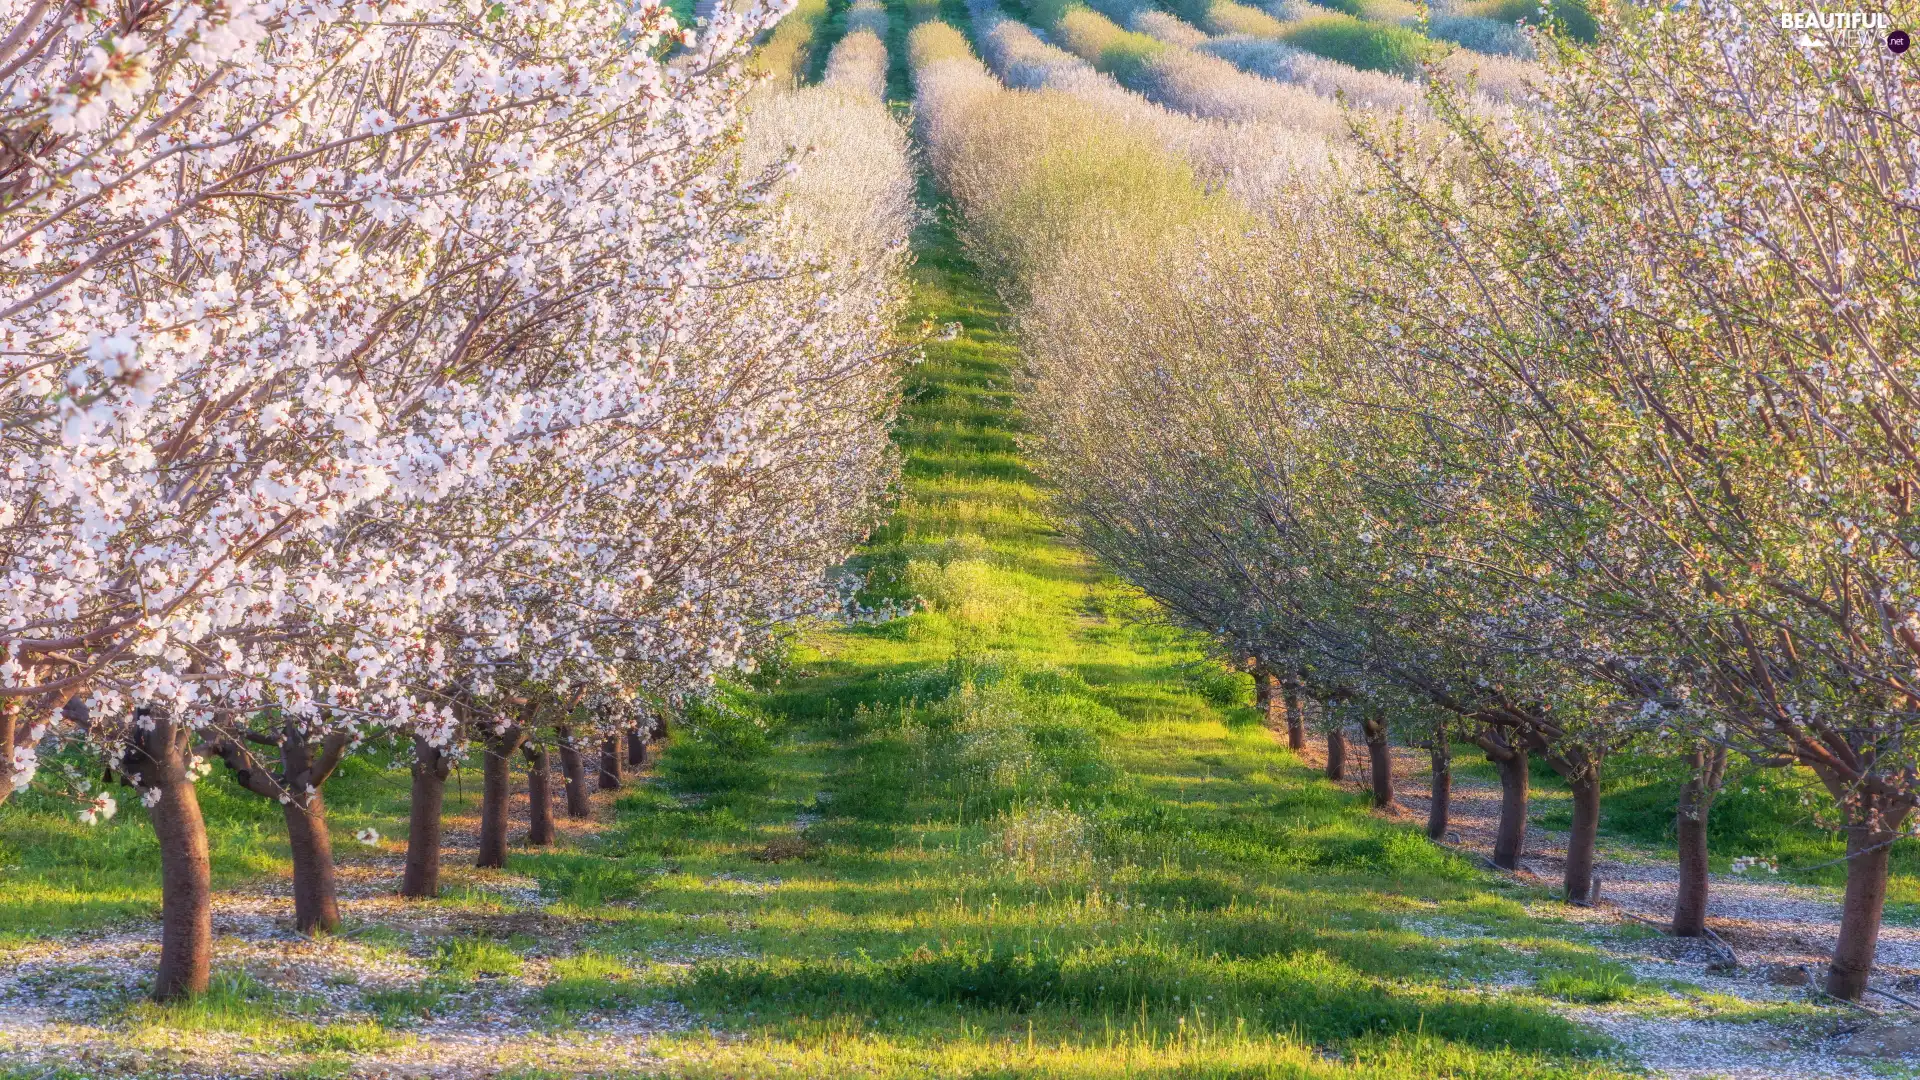 grass, Spring, Flourished, Fruit Trees, orchard